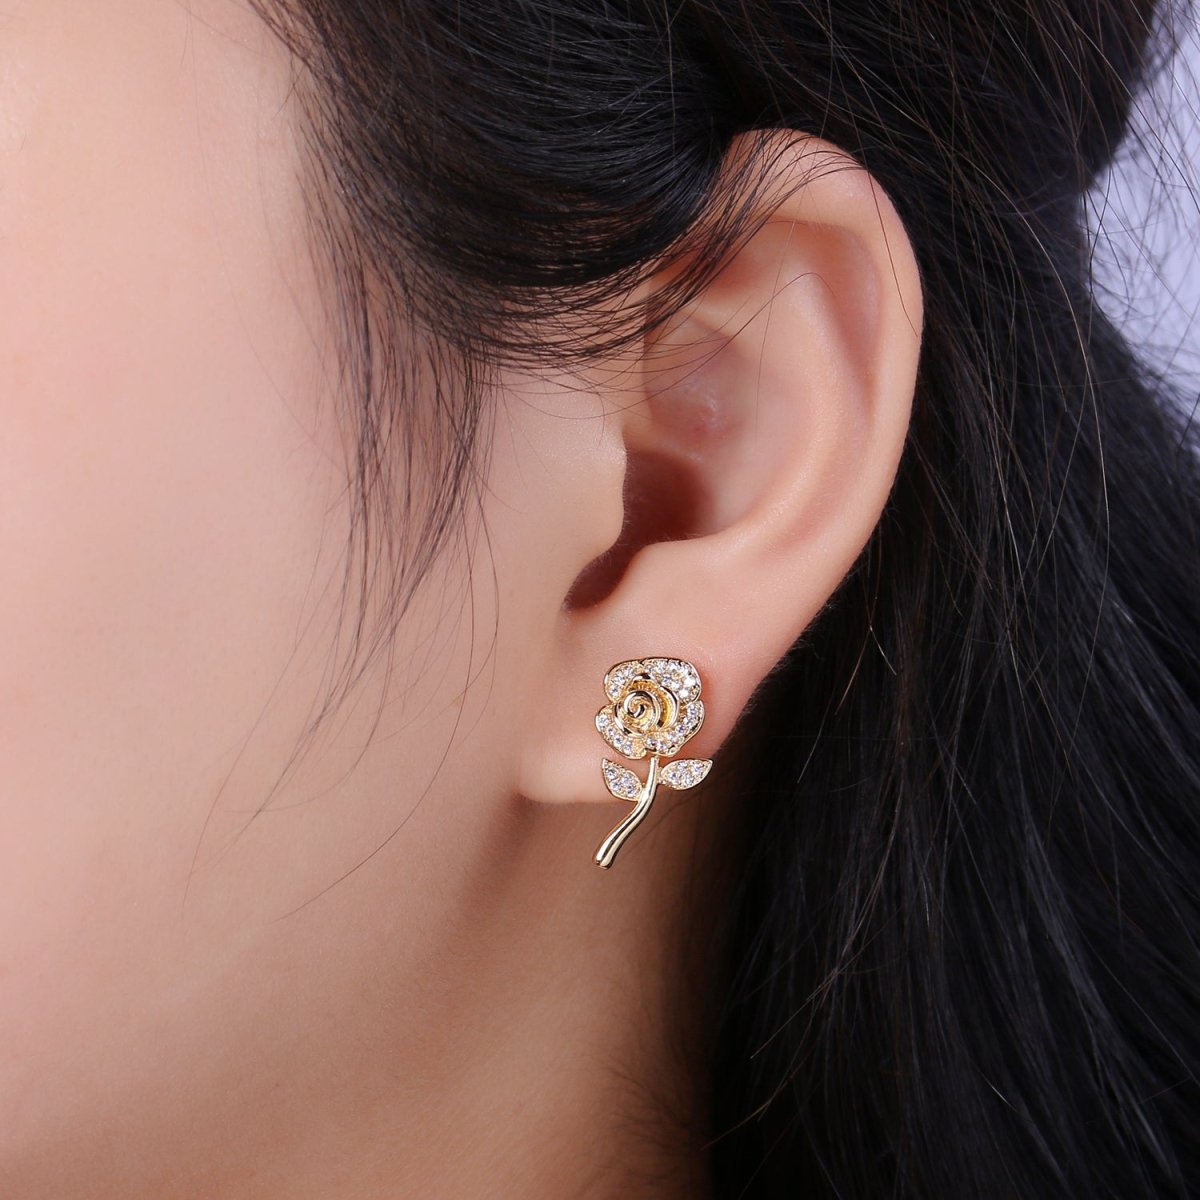 Mini flower studs, Gold floral studs, tiny flower earrings, flower jewelry, gold flower earrings, gold flower studs, gift for mom T-233 - DLUXCA